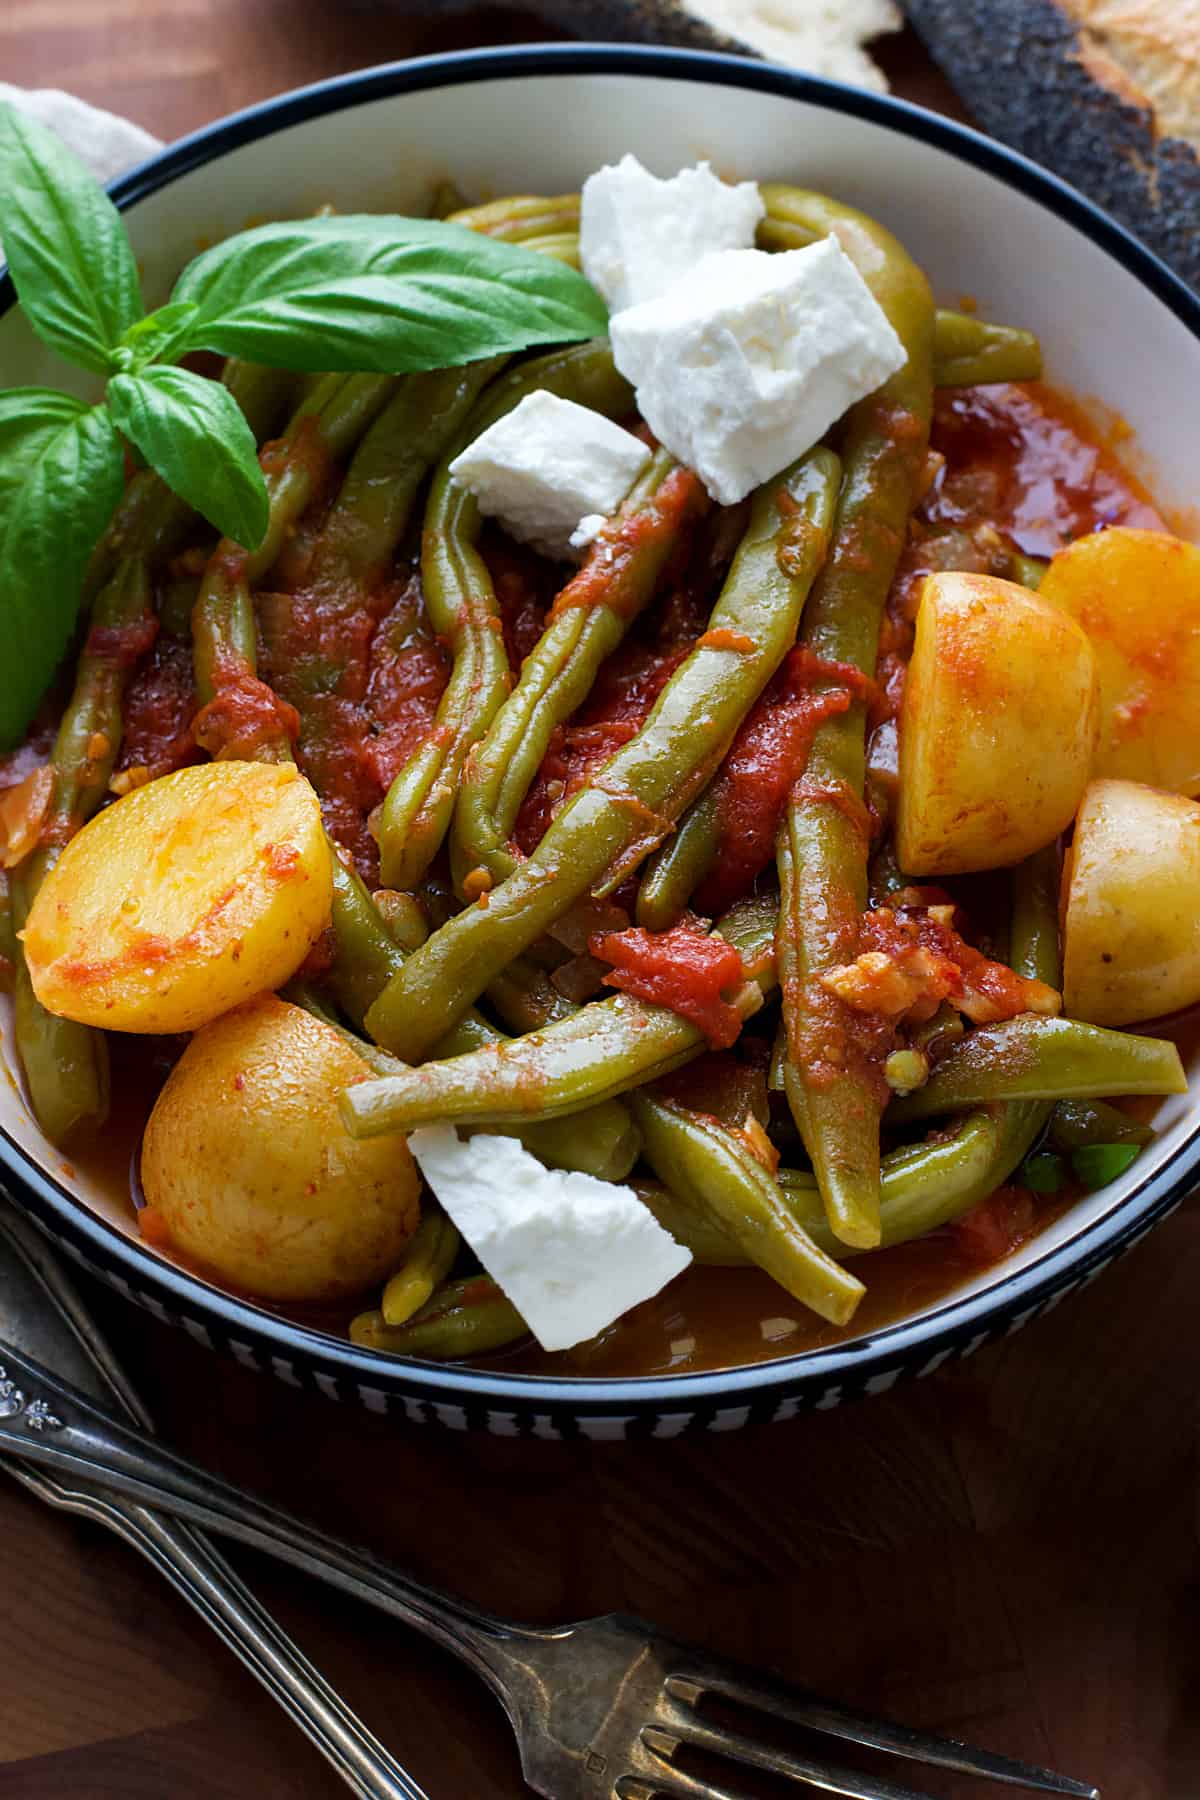 A plate with Greek green beans with potatoes in tomato sauce, a couple of feta cheese cubes and some fresh basil. On the table, utensils and a piece of bread.